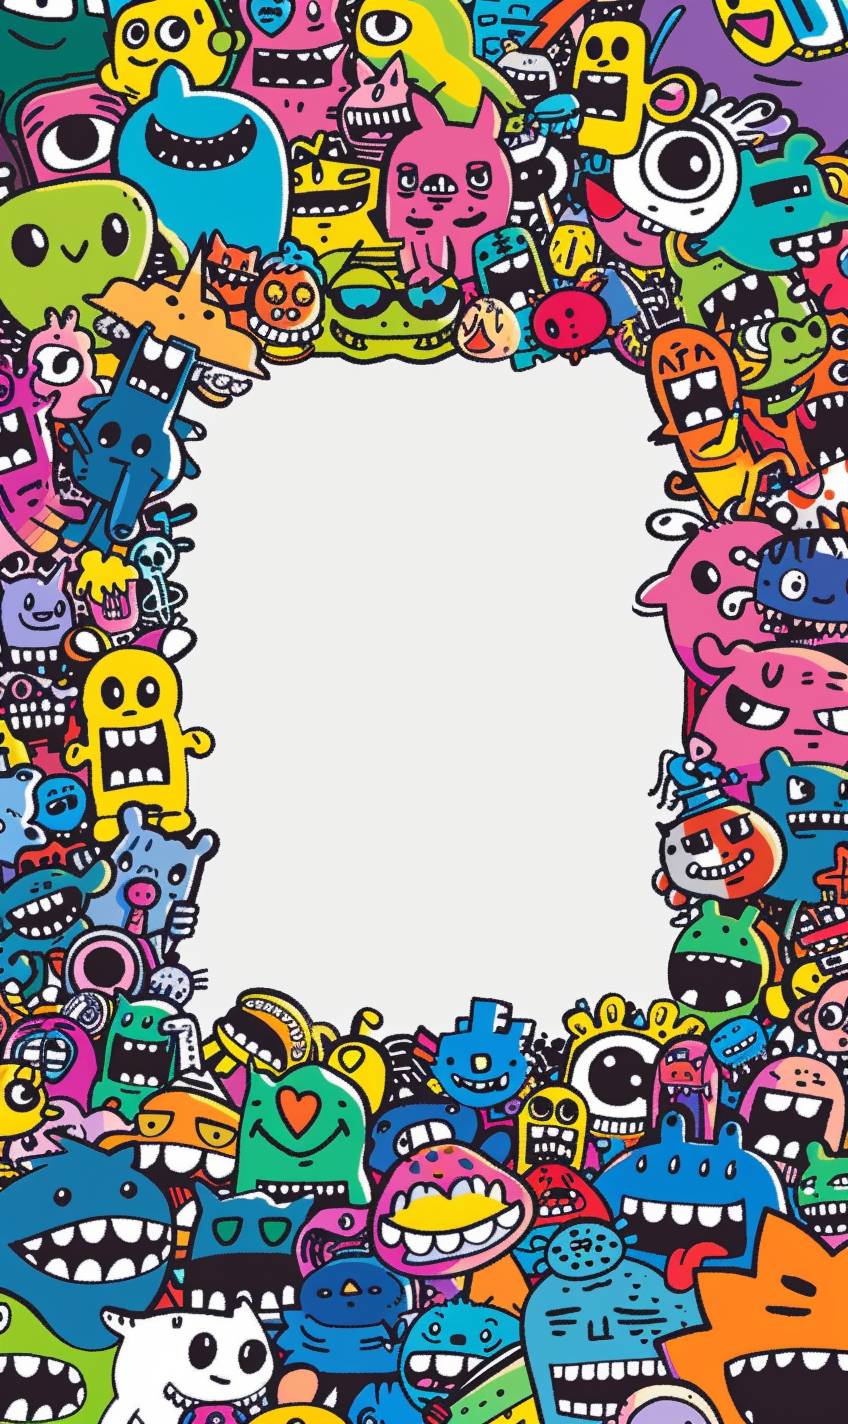 Create a high-quality image with a large, blank space in the center as the main focus, surrounded by a variety of colorful doodles on the sides. The doodles should include cartoon characters like animals, funny faces, superheroes, and quirky creatures. They should densely populate the edges, leaving the center area completely blank. The overall style should be playful and imaginative, with vibrant colors to create a lively and striking feel. The image is designed for Instagram story scale with the blank space being the primary focus.